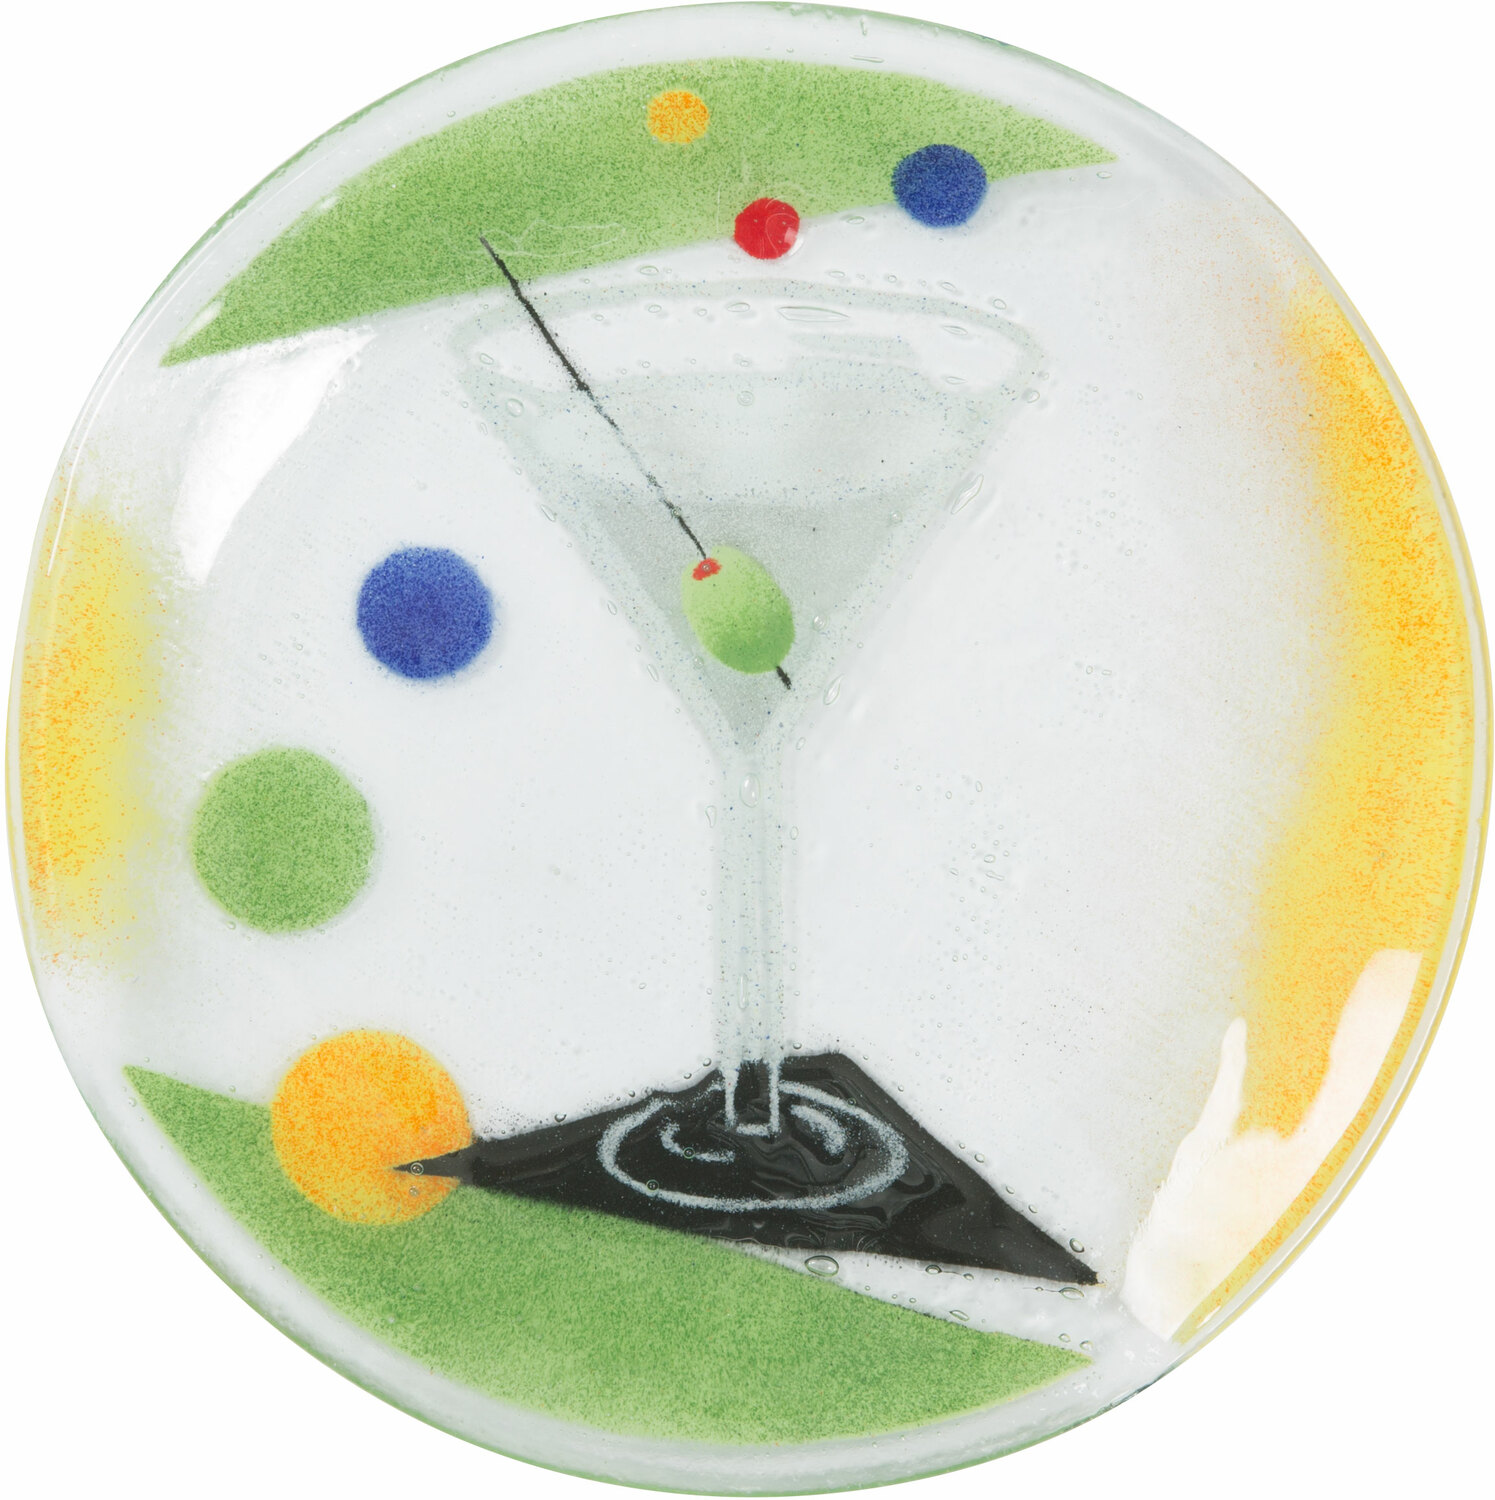 Cocktails by Fusion Art Glass - Cocktails - Martini 8" Round Plate